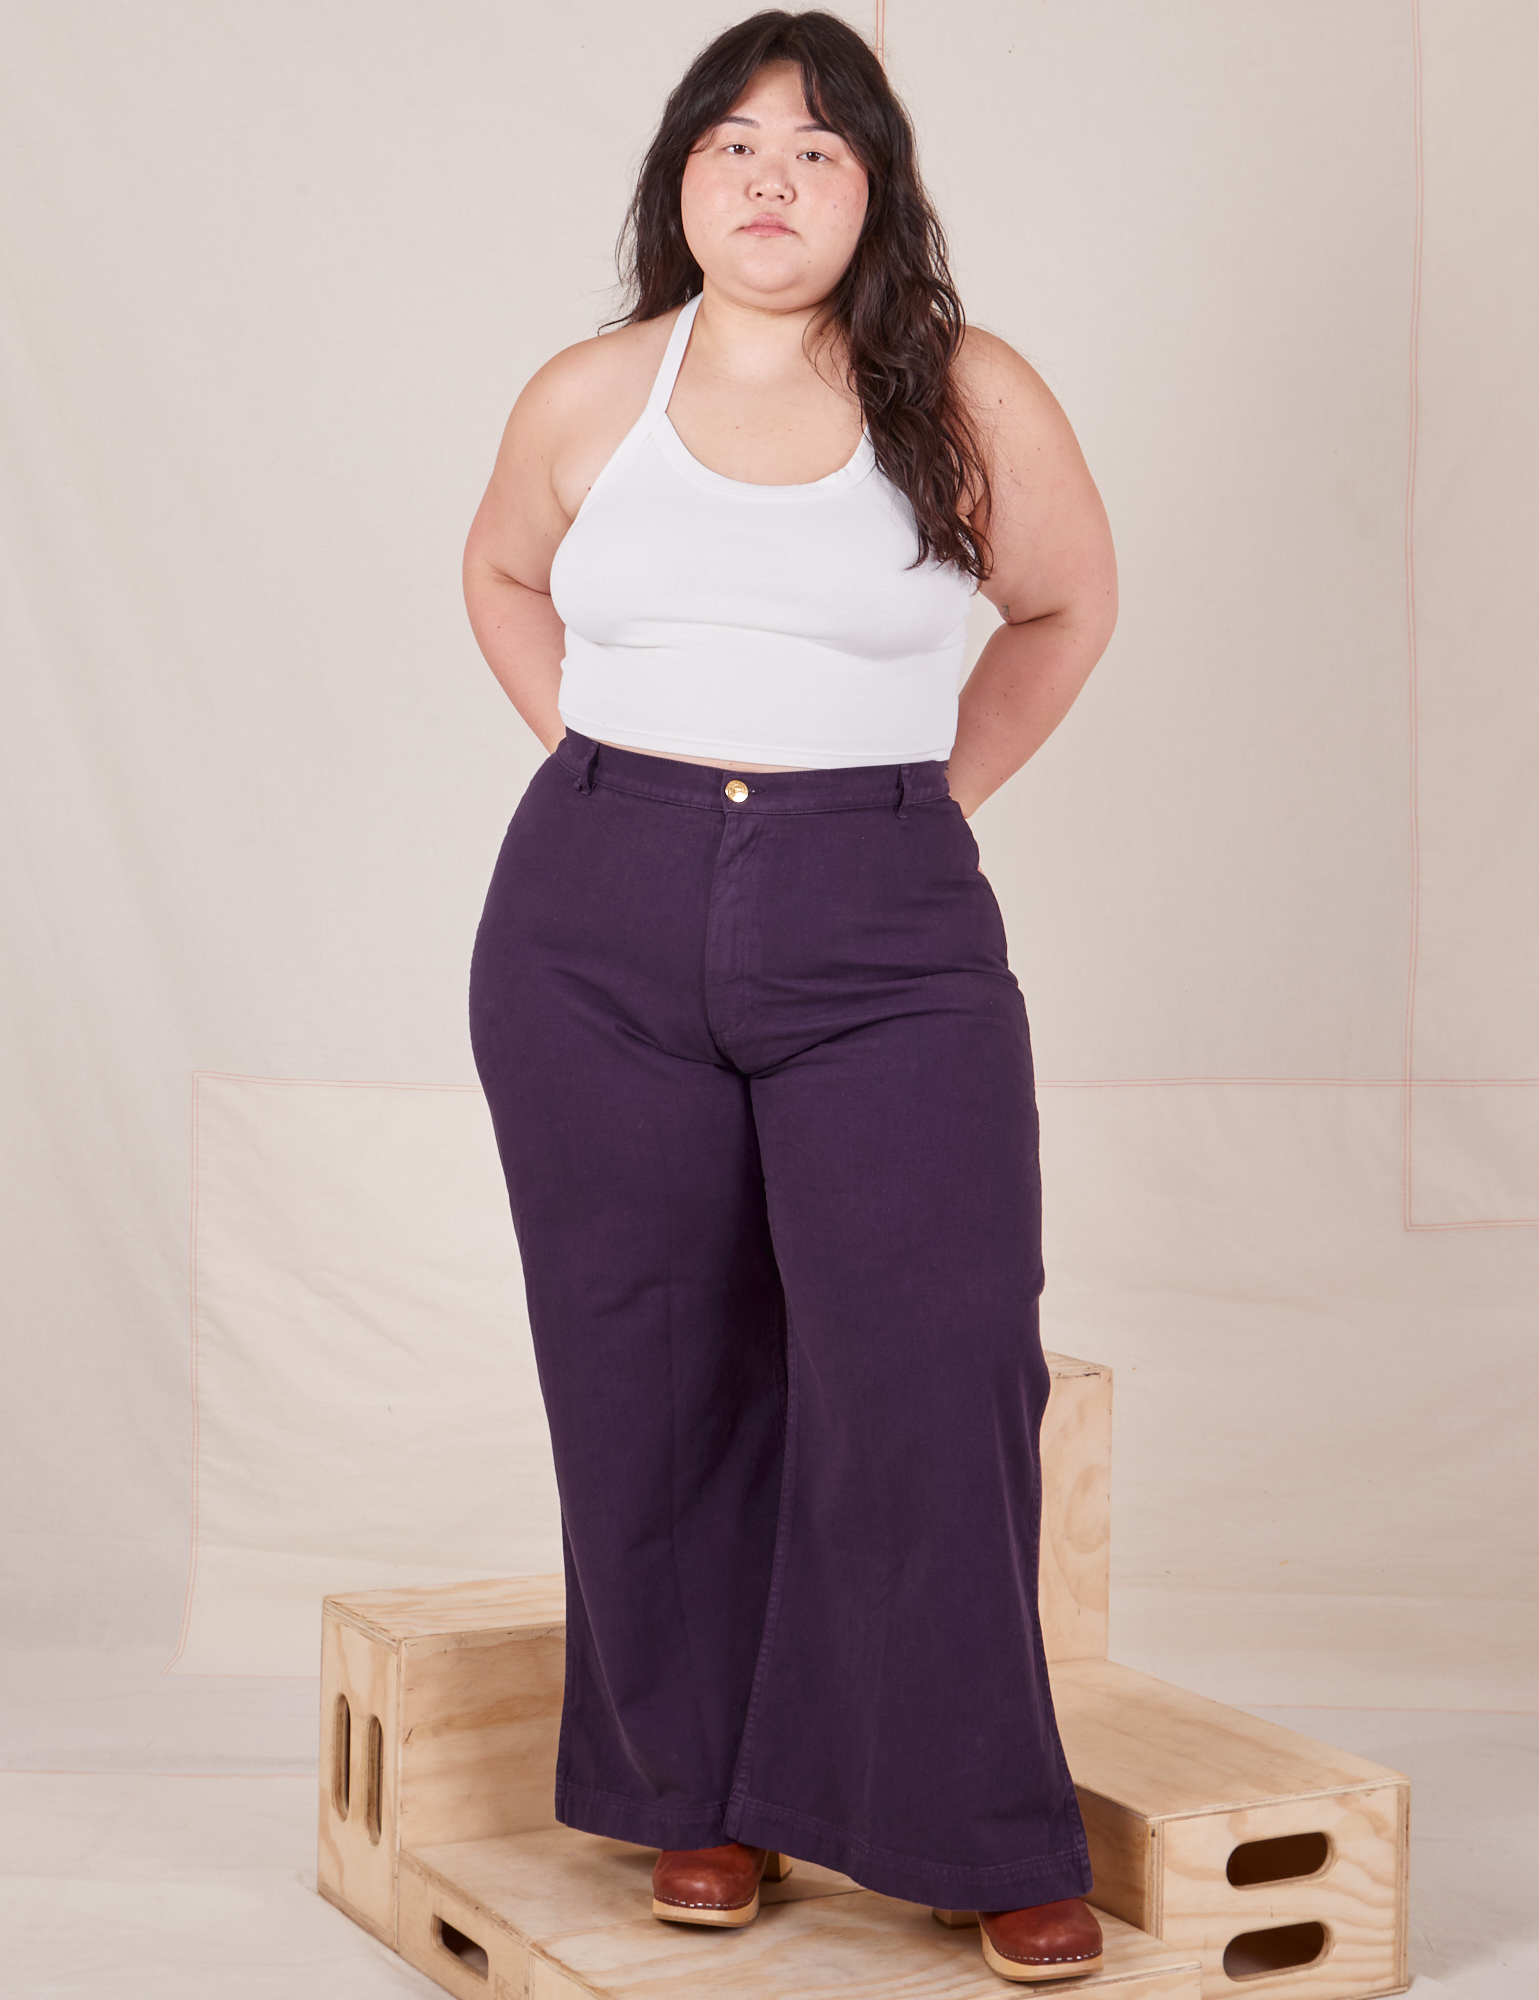 Ashley is wearing Bell Bottoms in Nebula Purple and Halter Top in vintage tee off-white